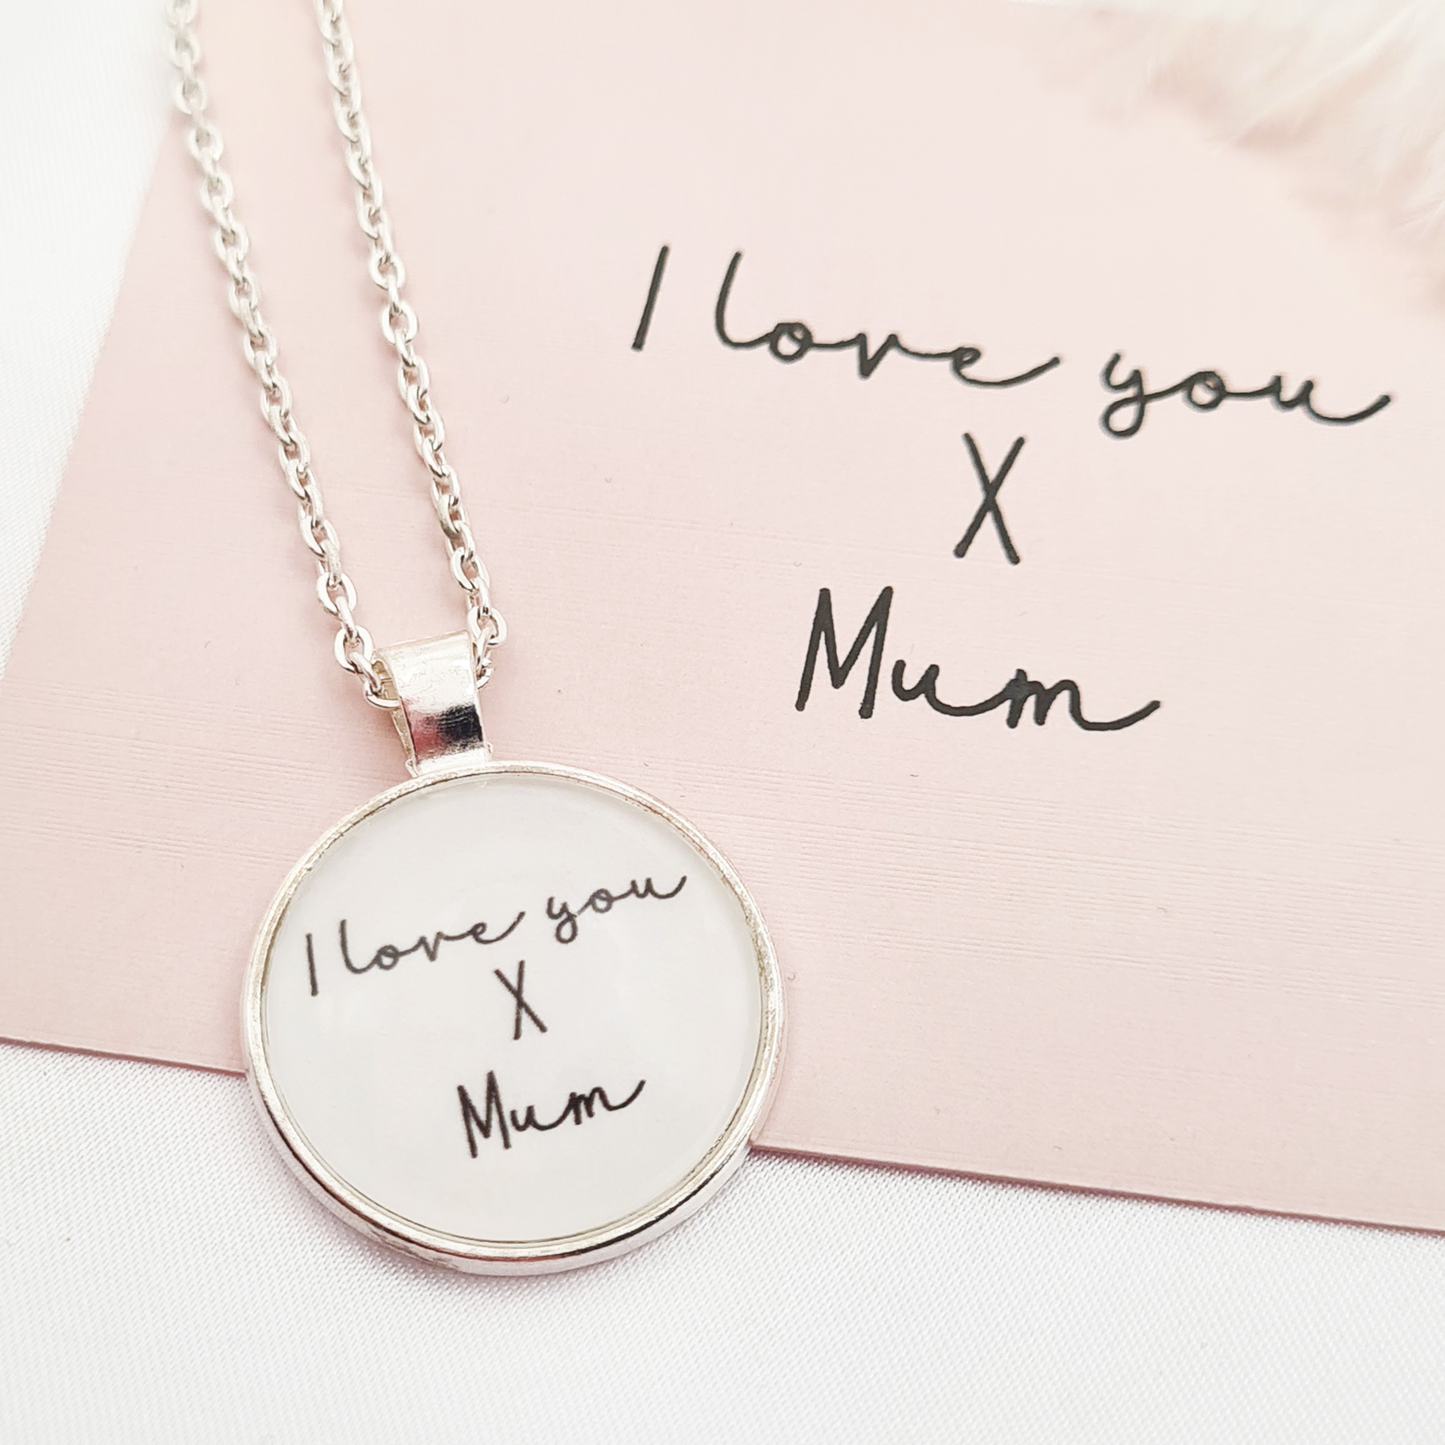 Personalised handwriting necklace in silver with pendant close up